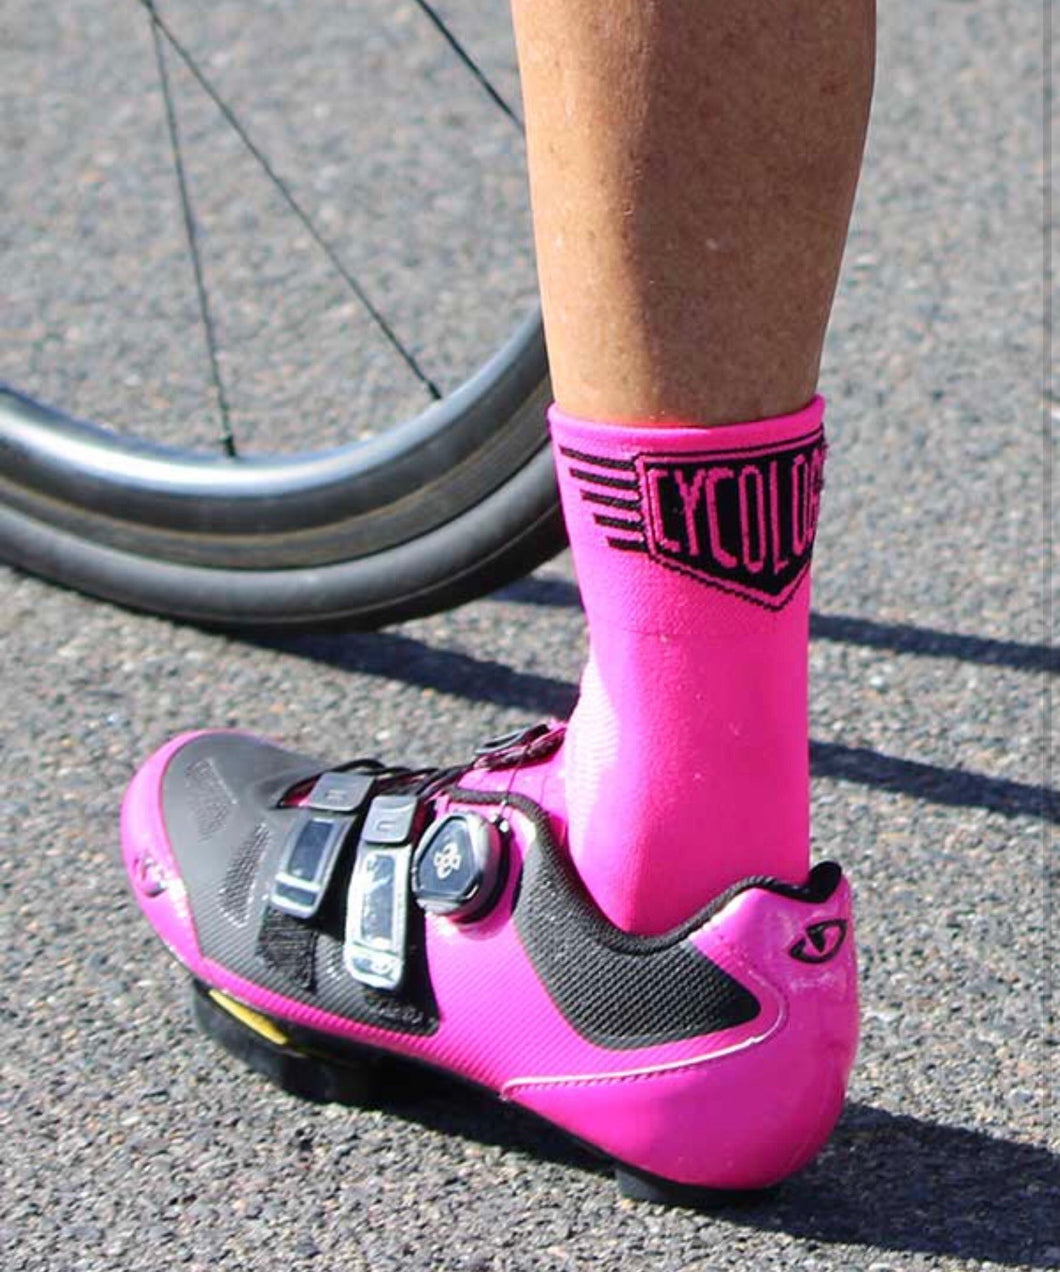 Cycology Quality Unisex Compression Cycling Socks - Design Fluoro Pink